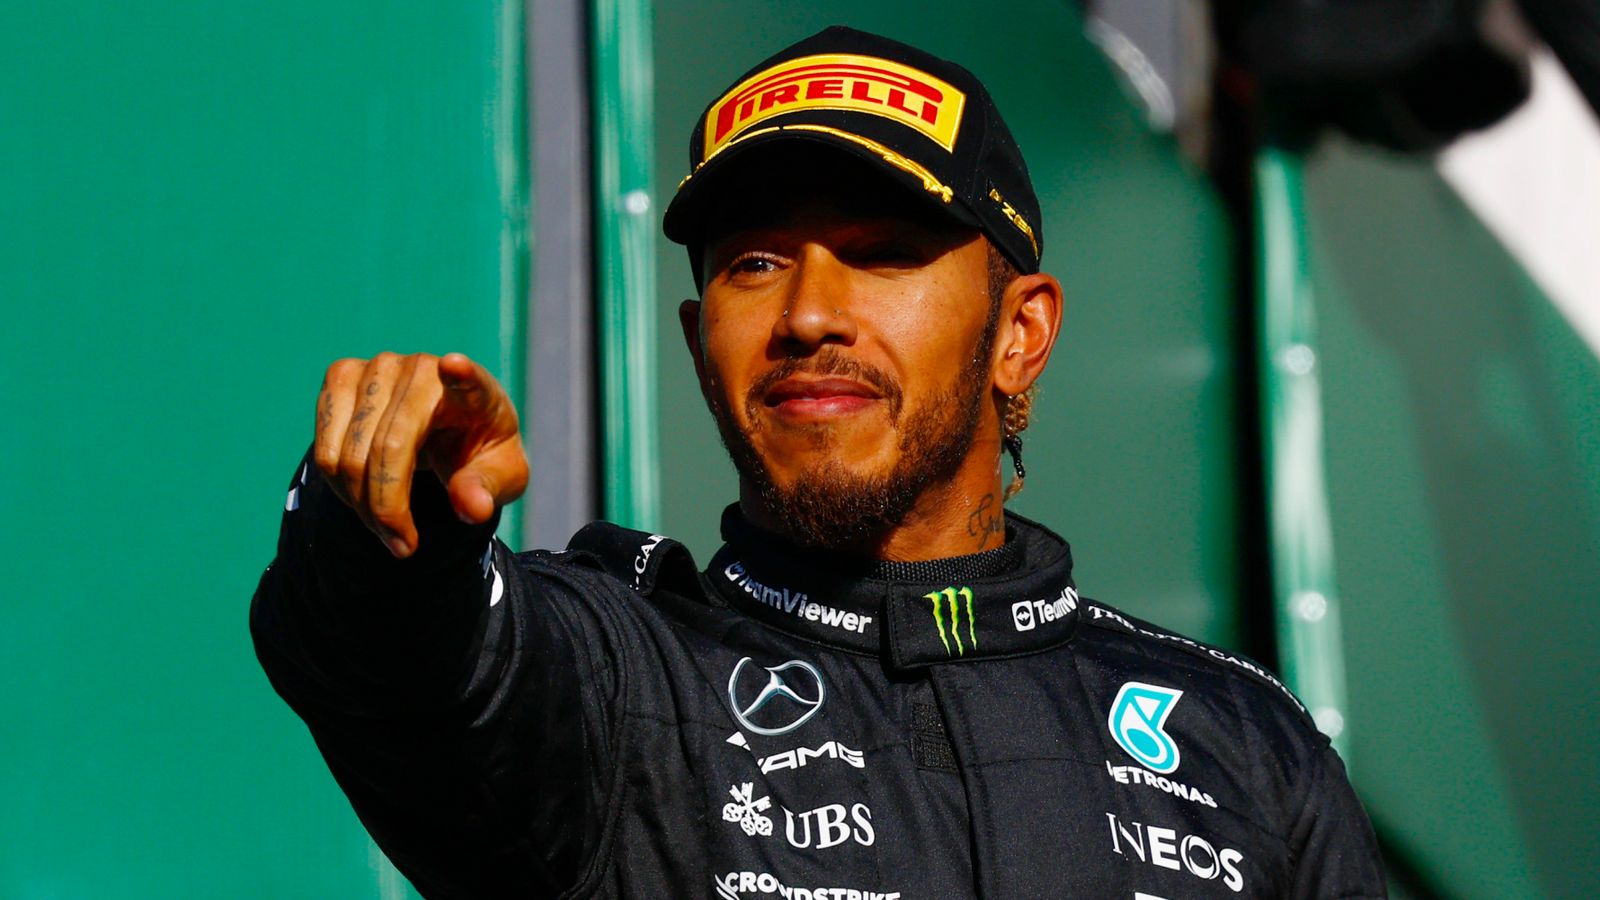 Hamilton hails 'amazing' second place | Russell reveals brake issue